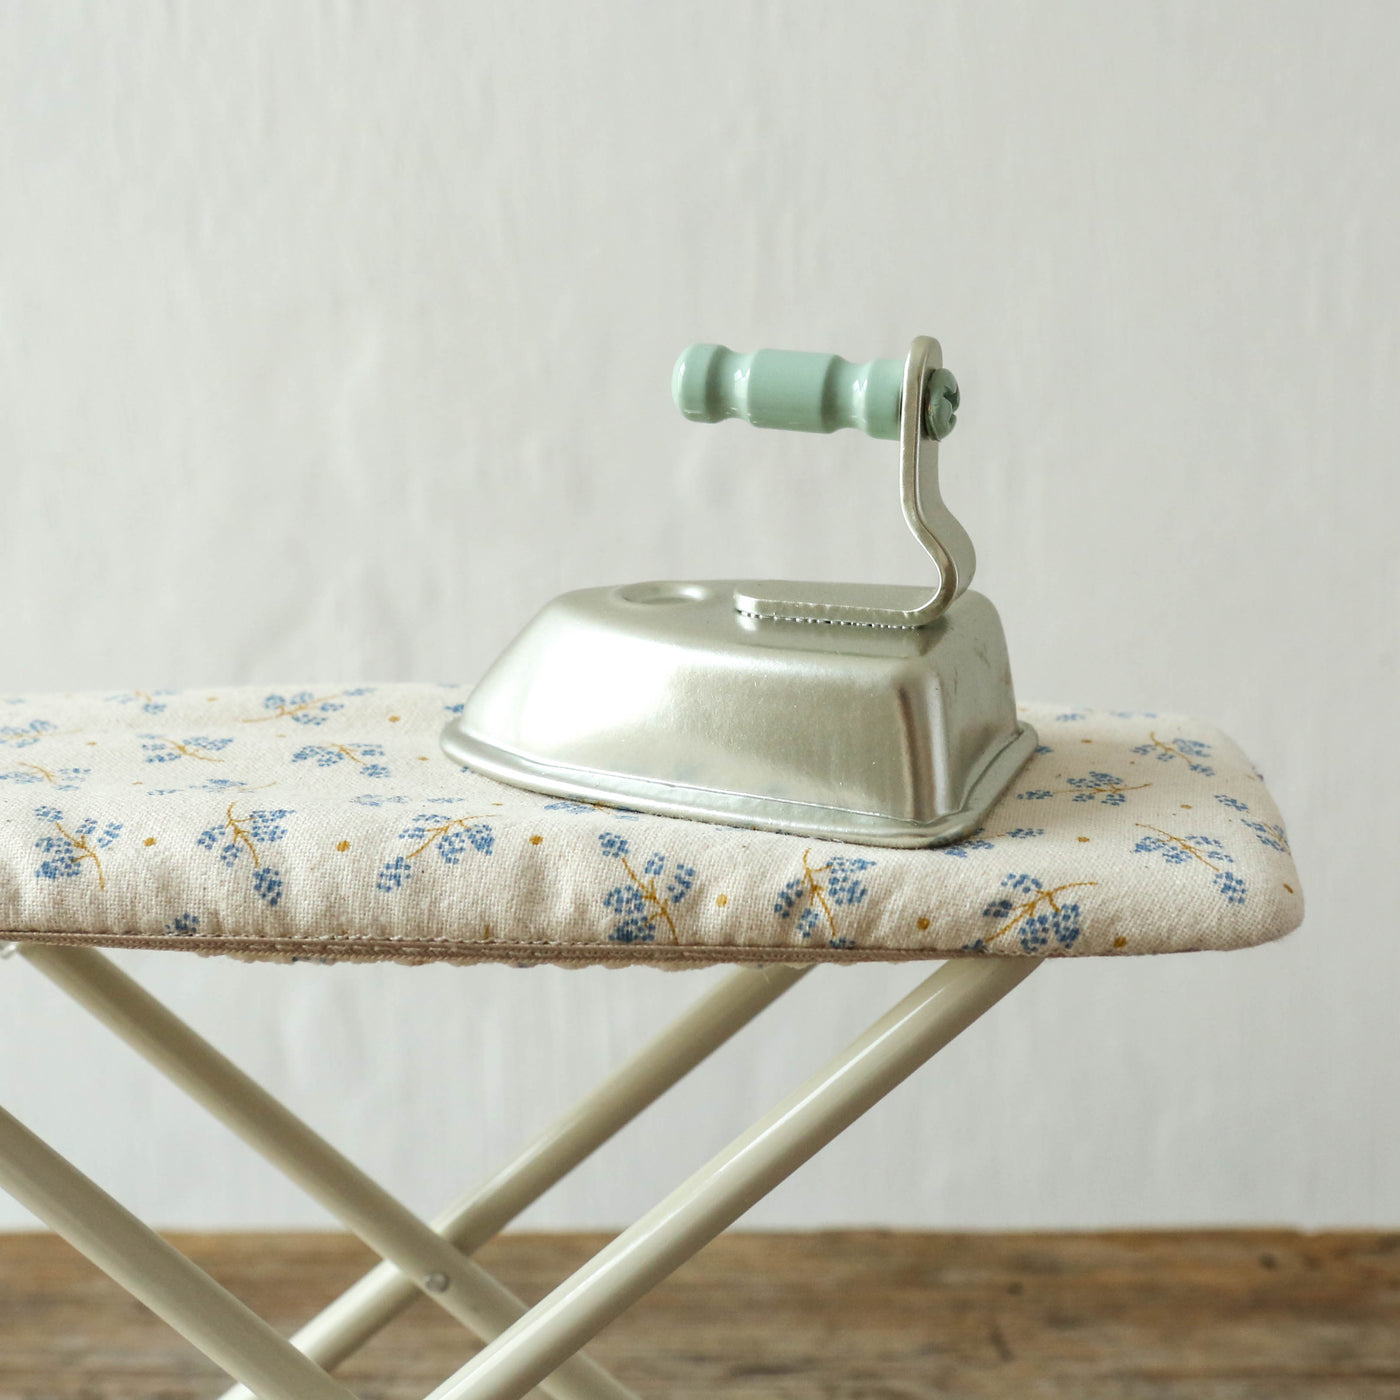 Iron and Ironing Board by Maileg